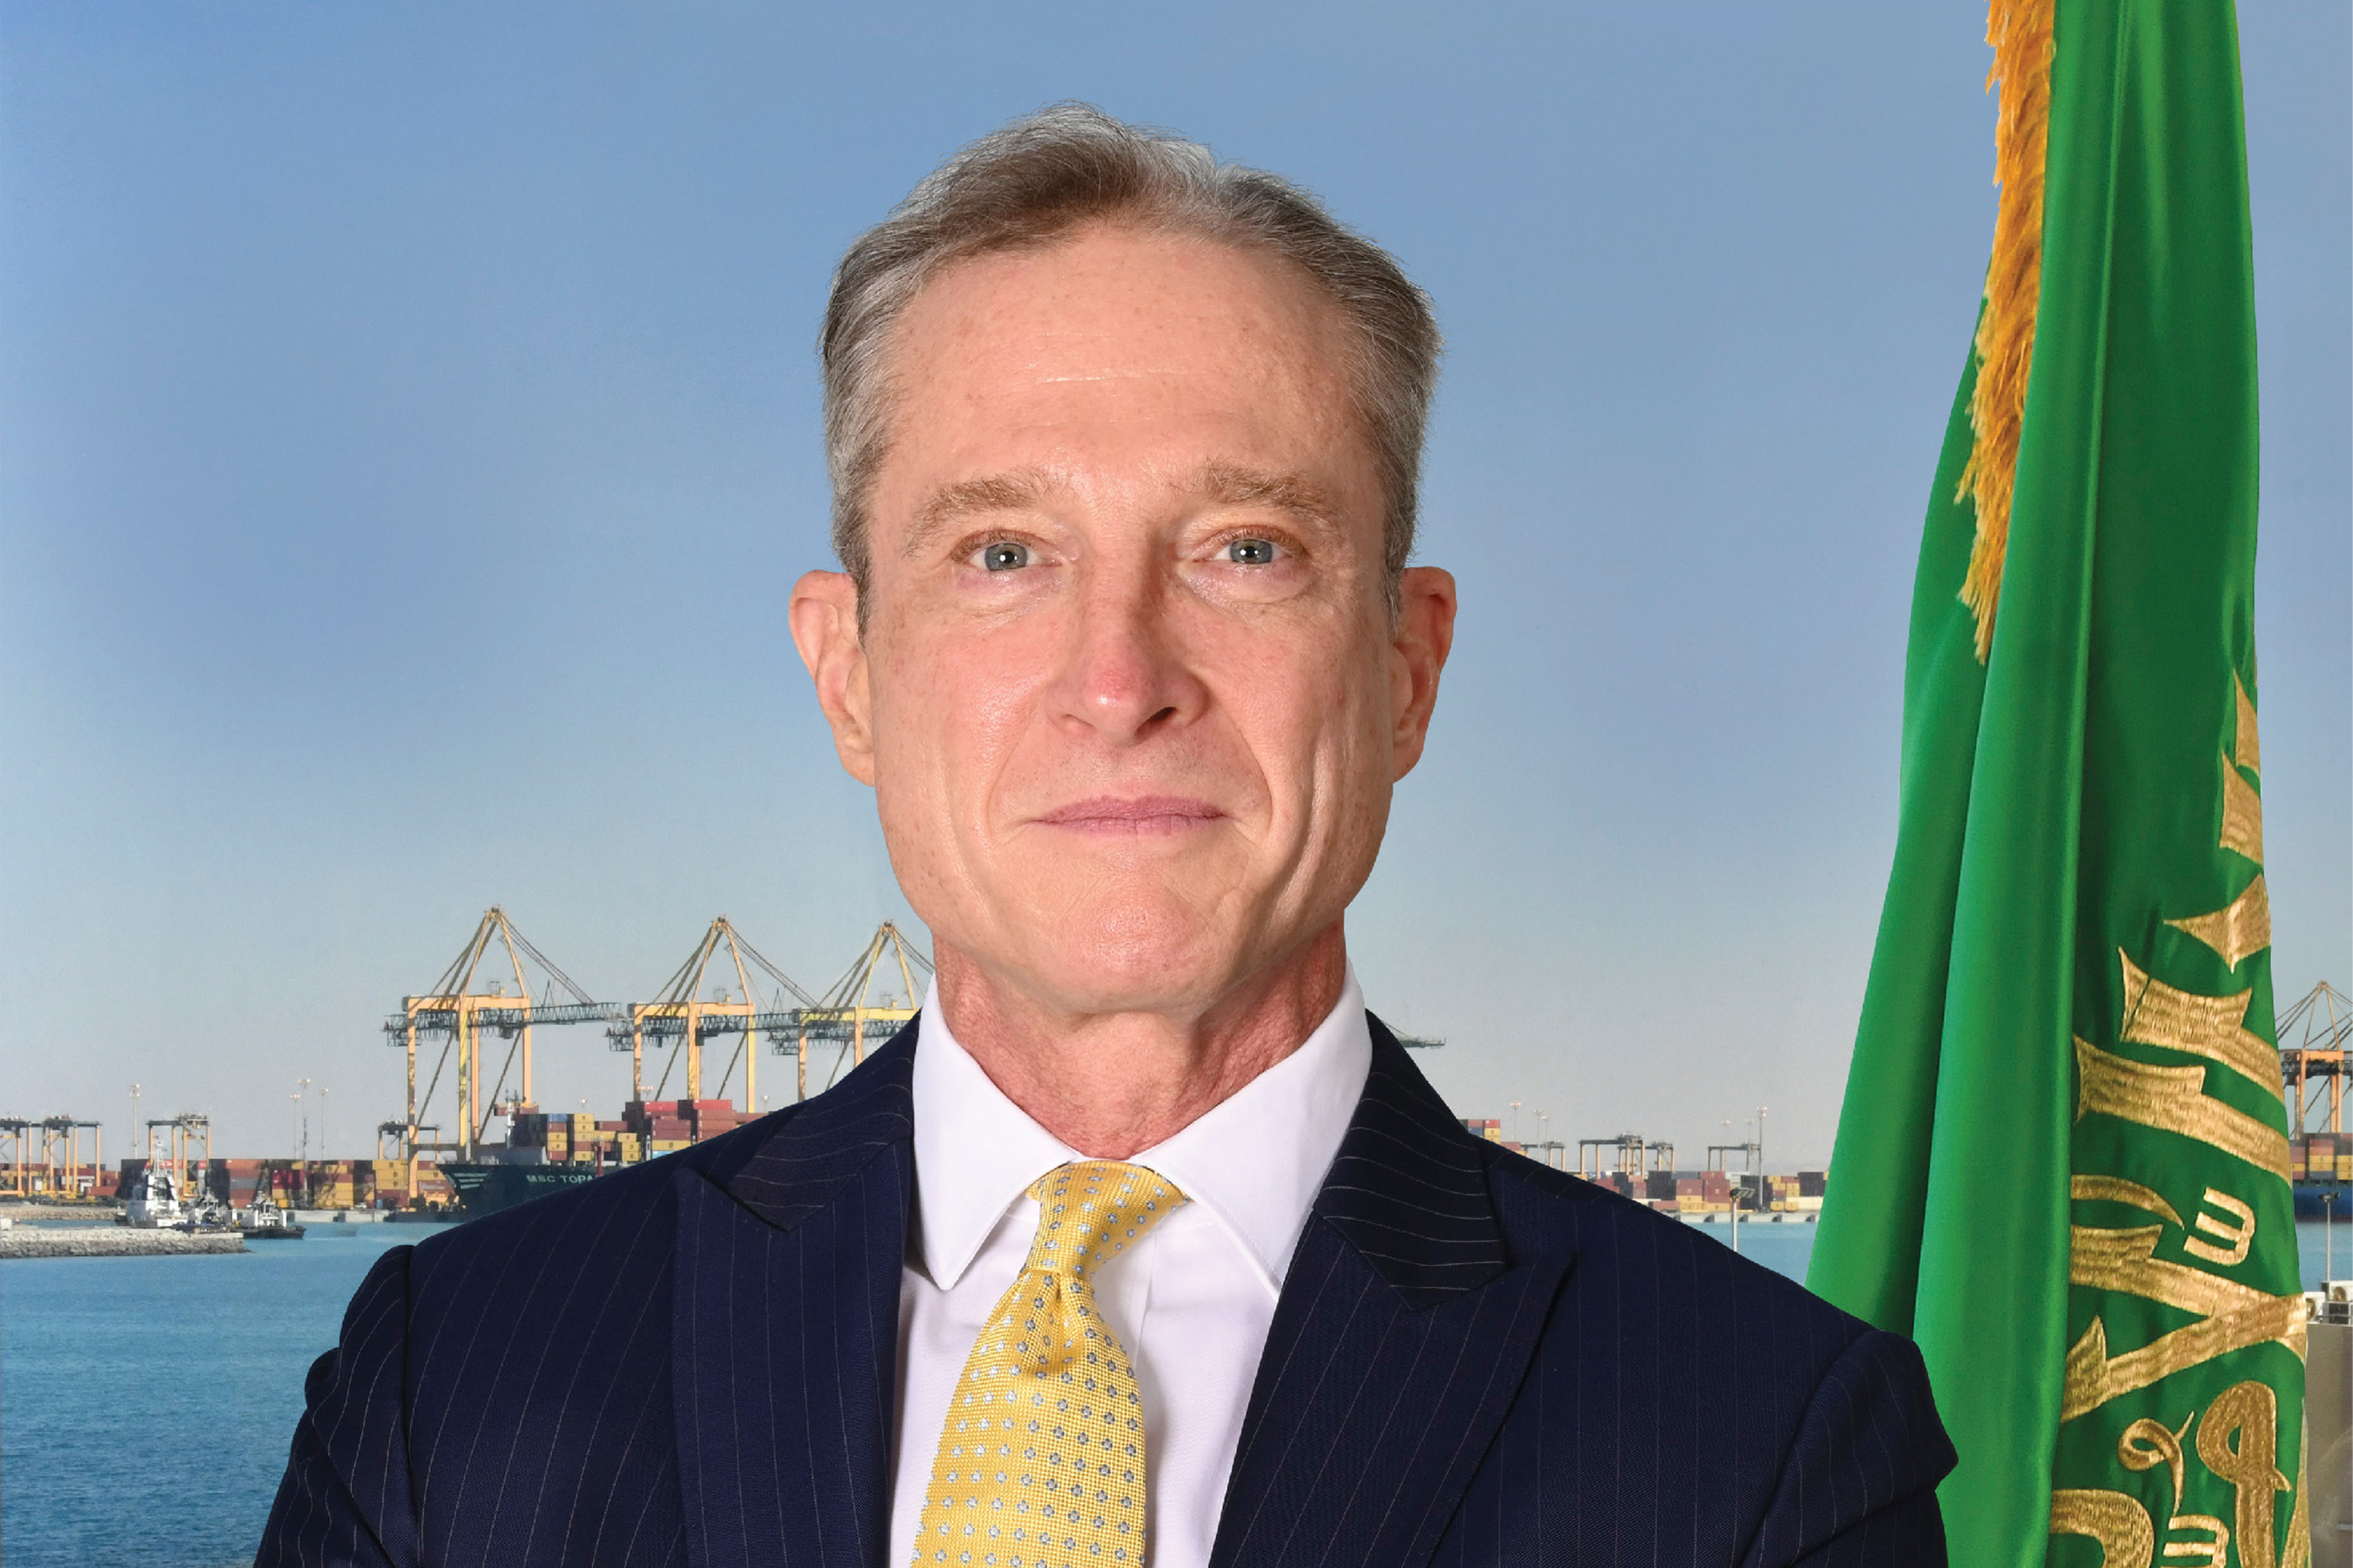 JAY NEW NAMED CEO OF KING ABDULLAH PORT